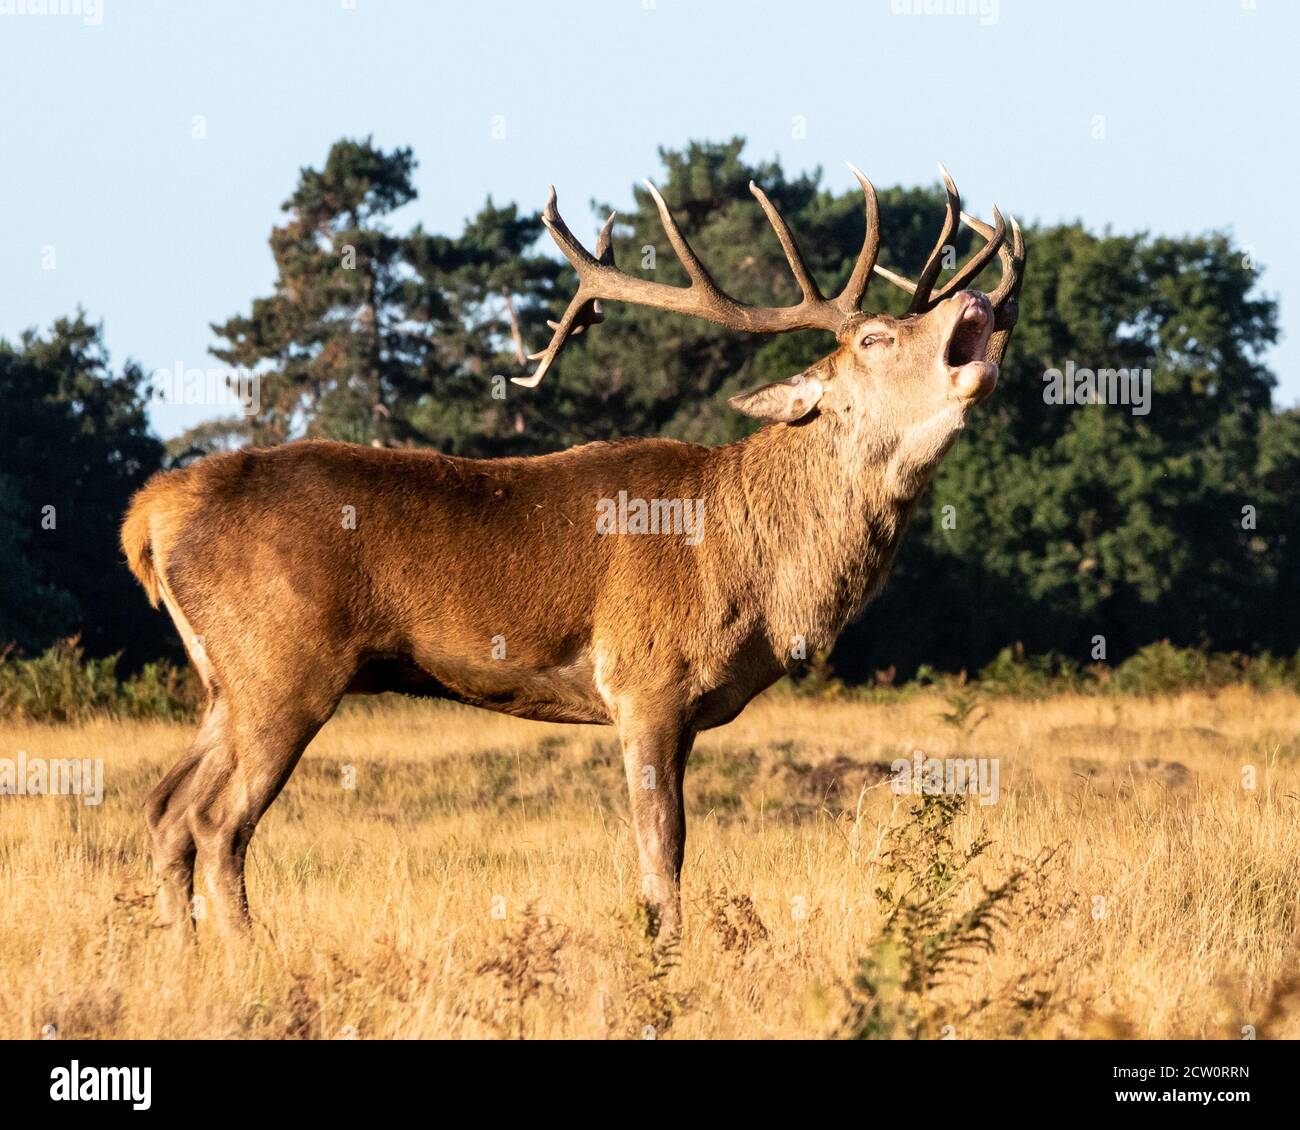 A dominant red deer stag bellows in the early morning sunlight of early Autumn, in Bushy Park, West London Stock Photo